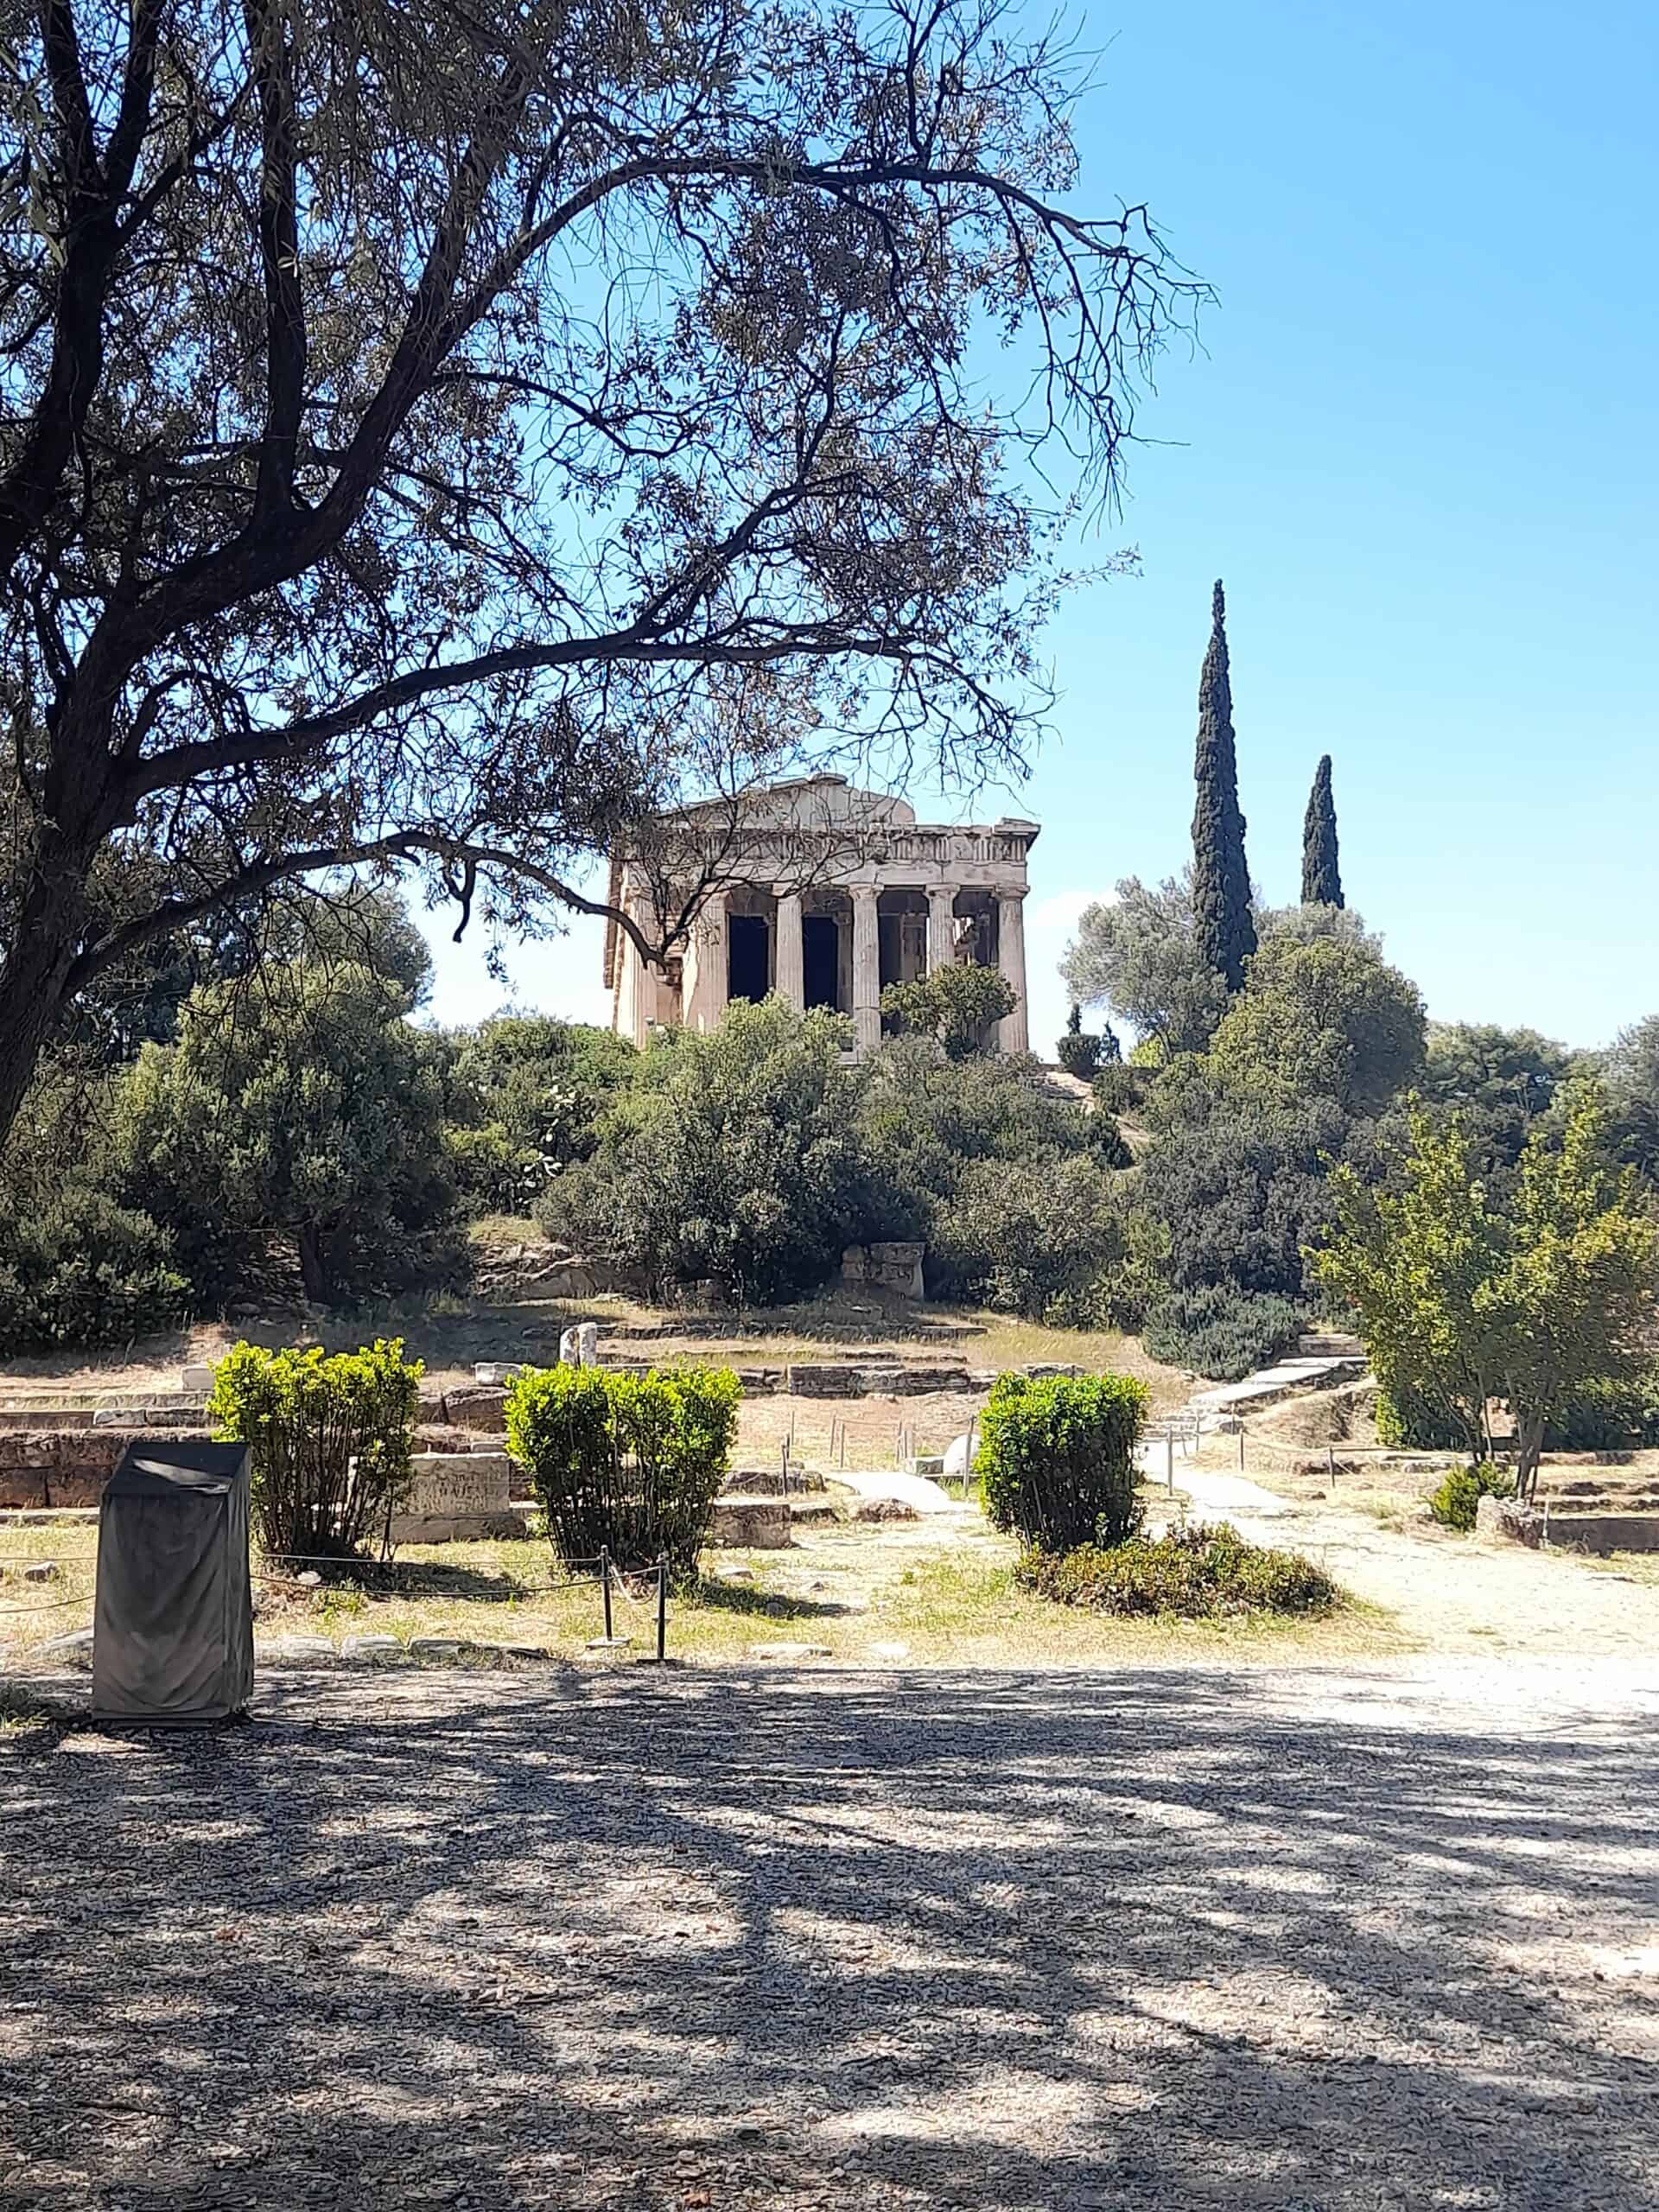 Explore Ancient Athens with the Athens combo ticket